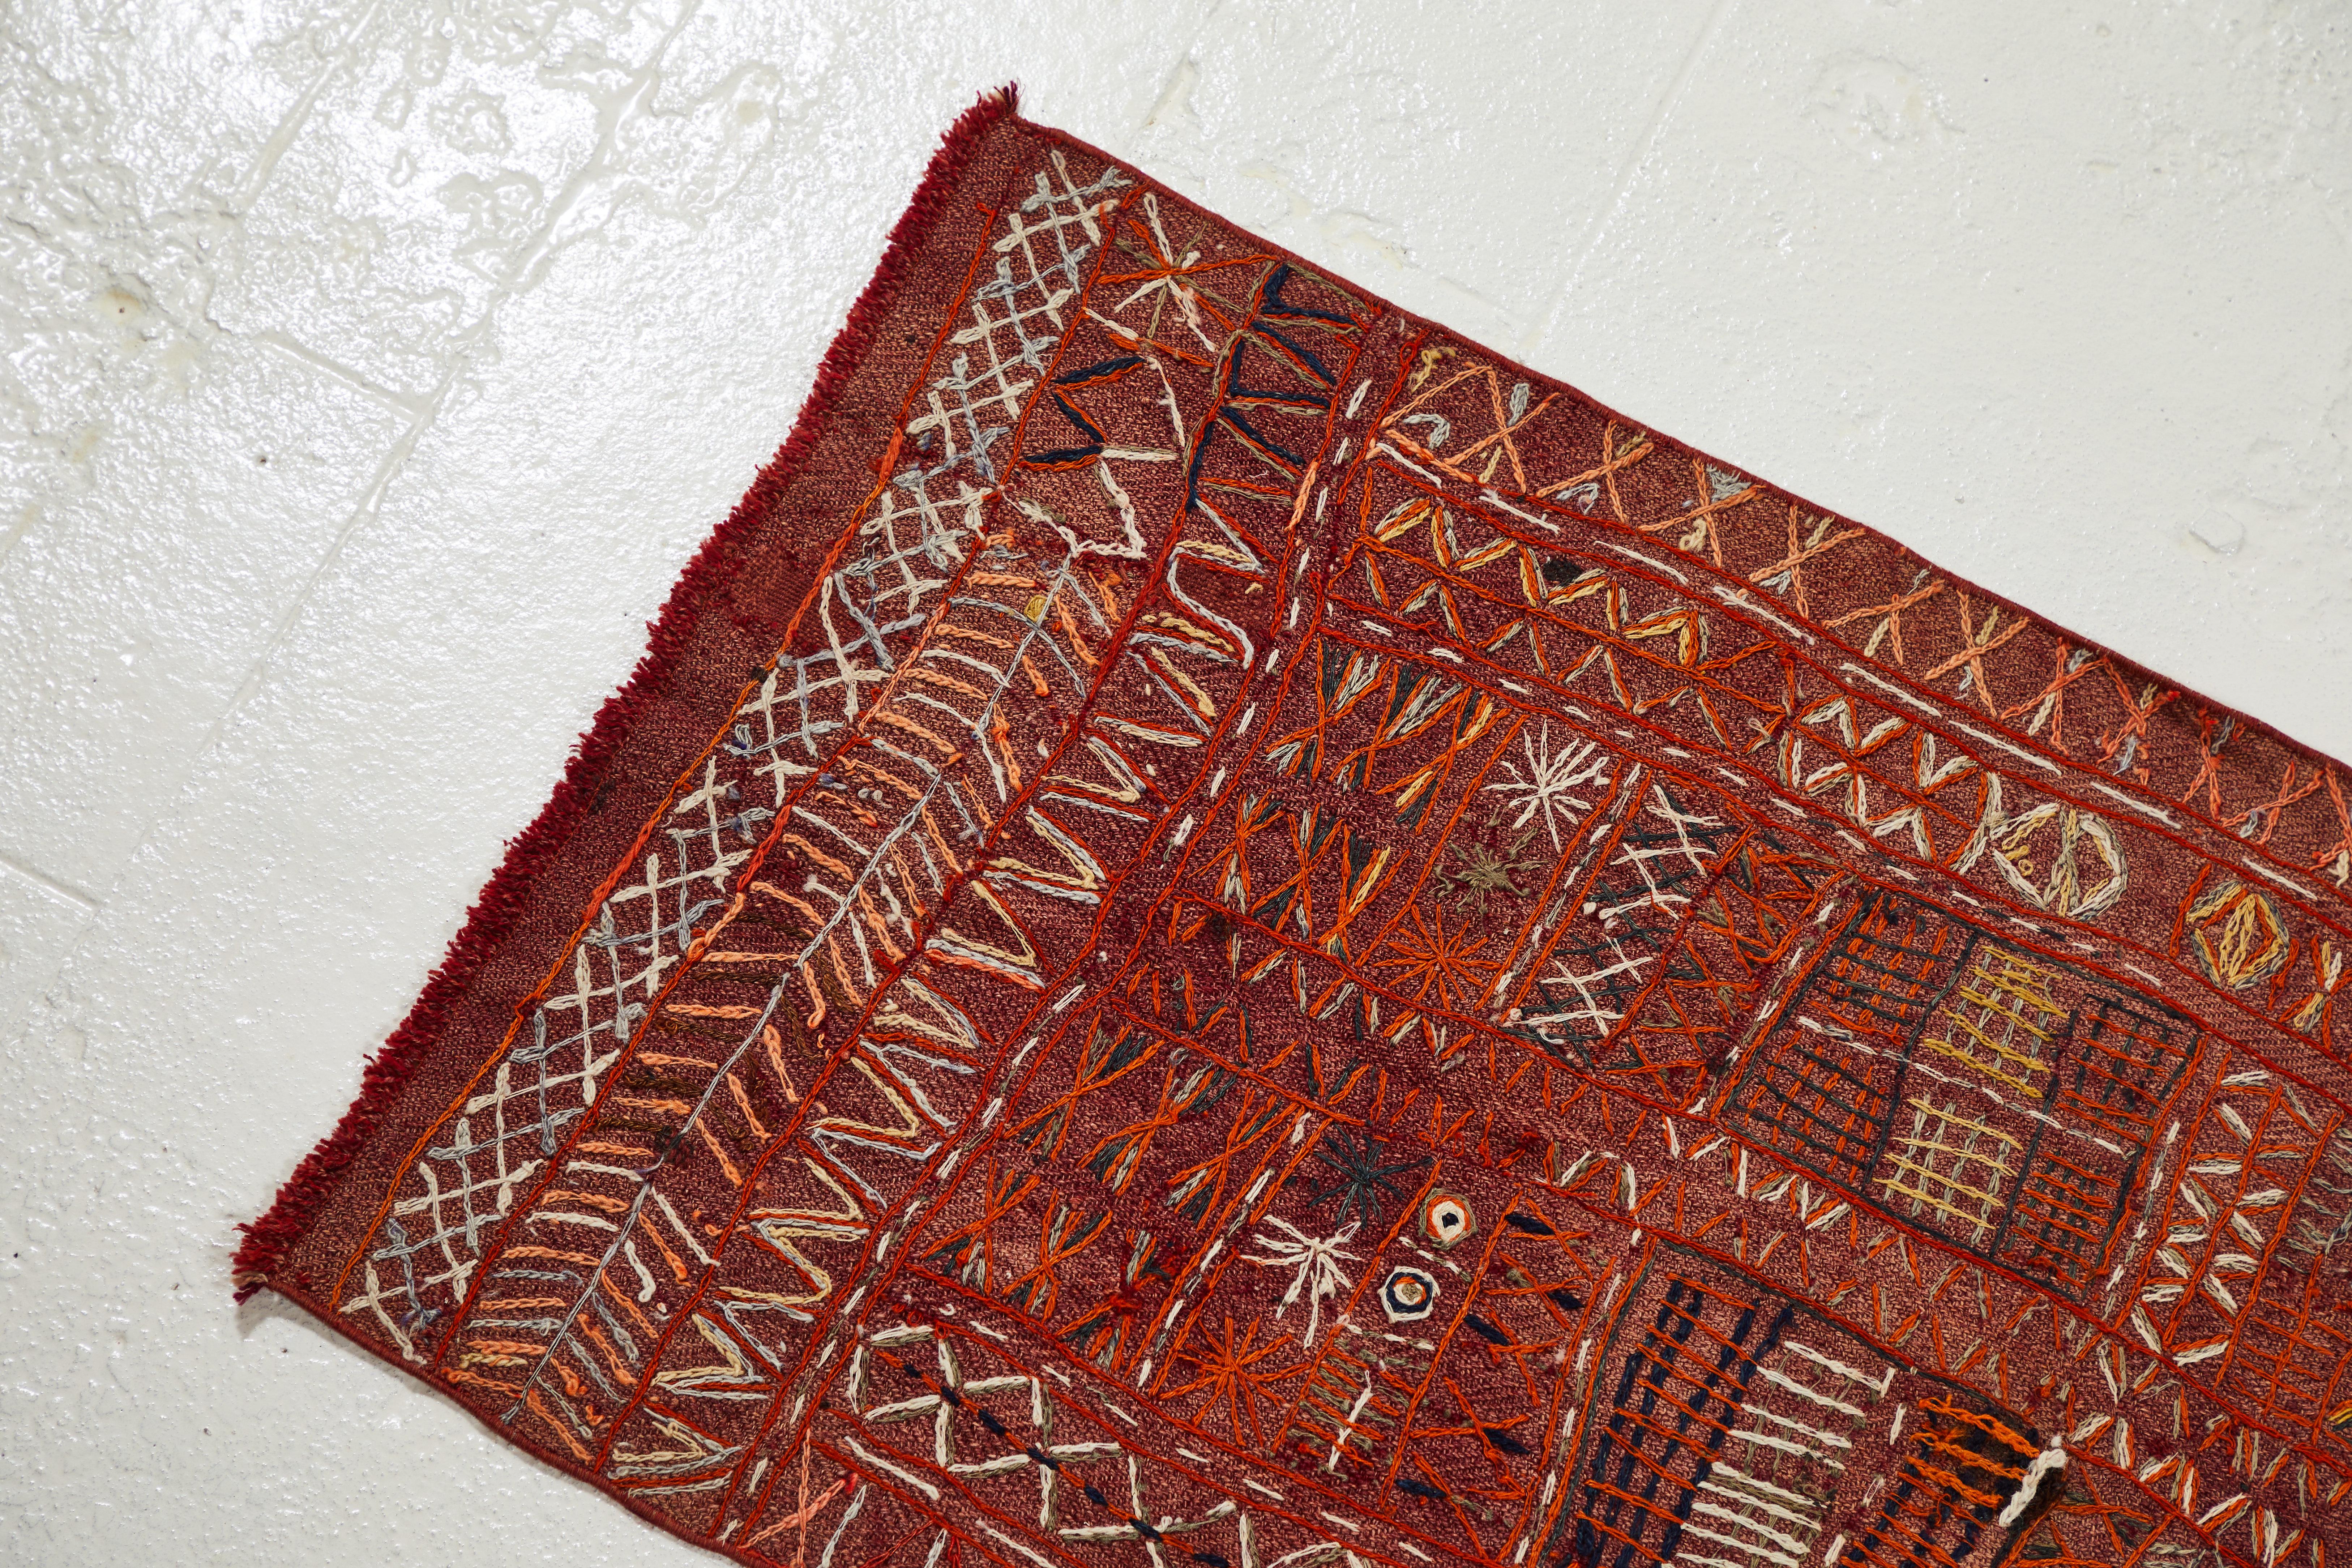 Antique Arabi runner with hand embroidered crewel work. This runner beautifully made by hand and is beautifully aged and worn.